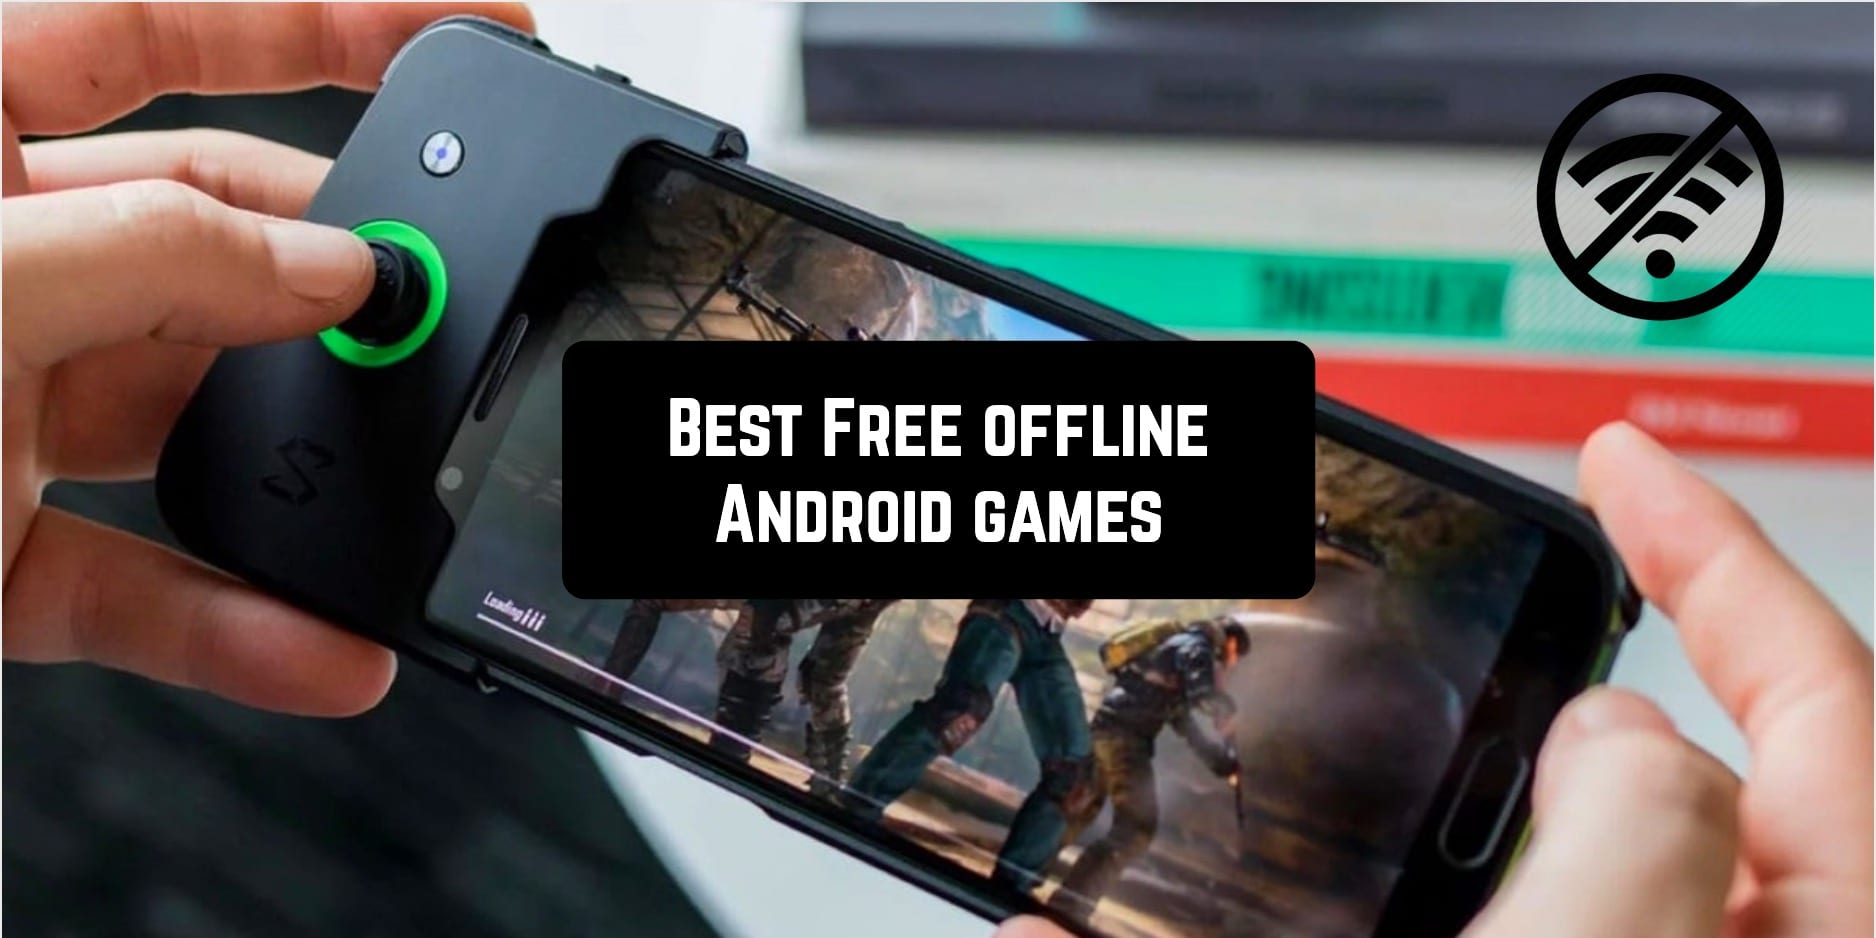 Best Free offline Android games